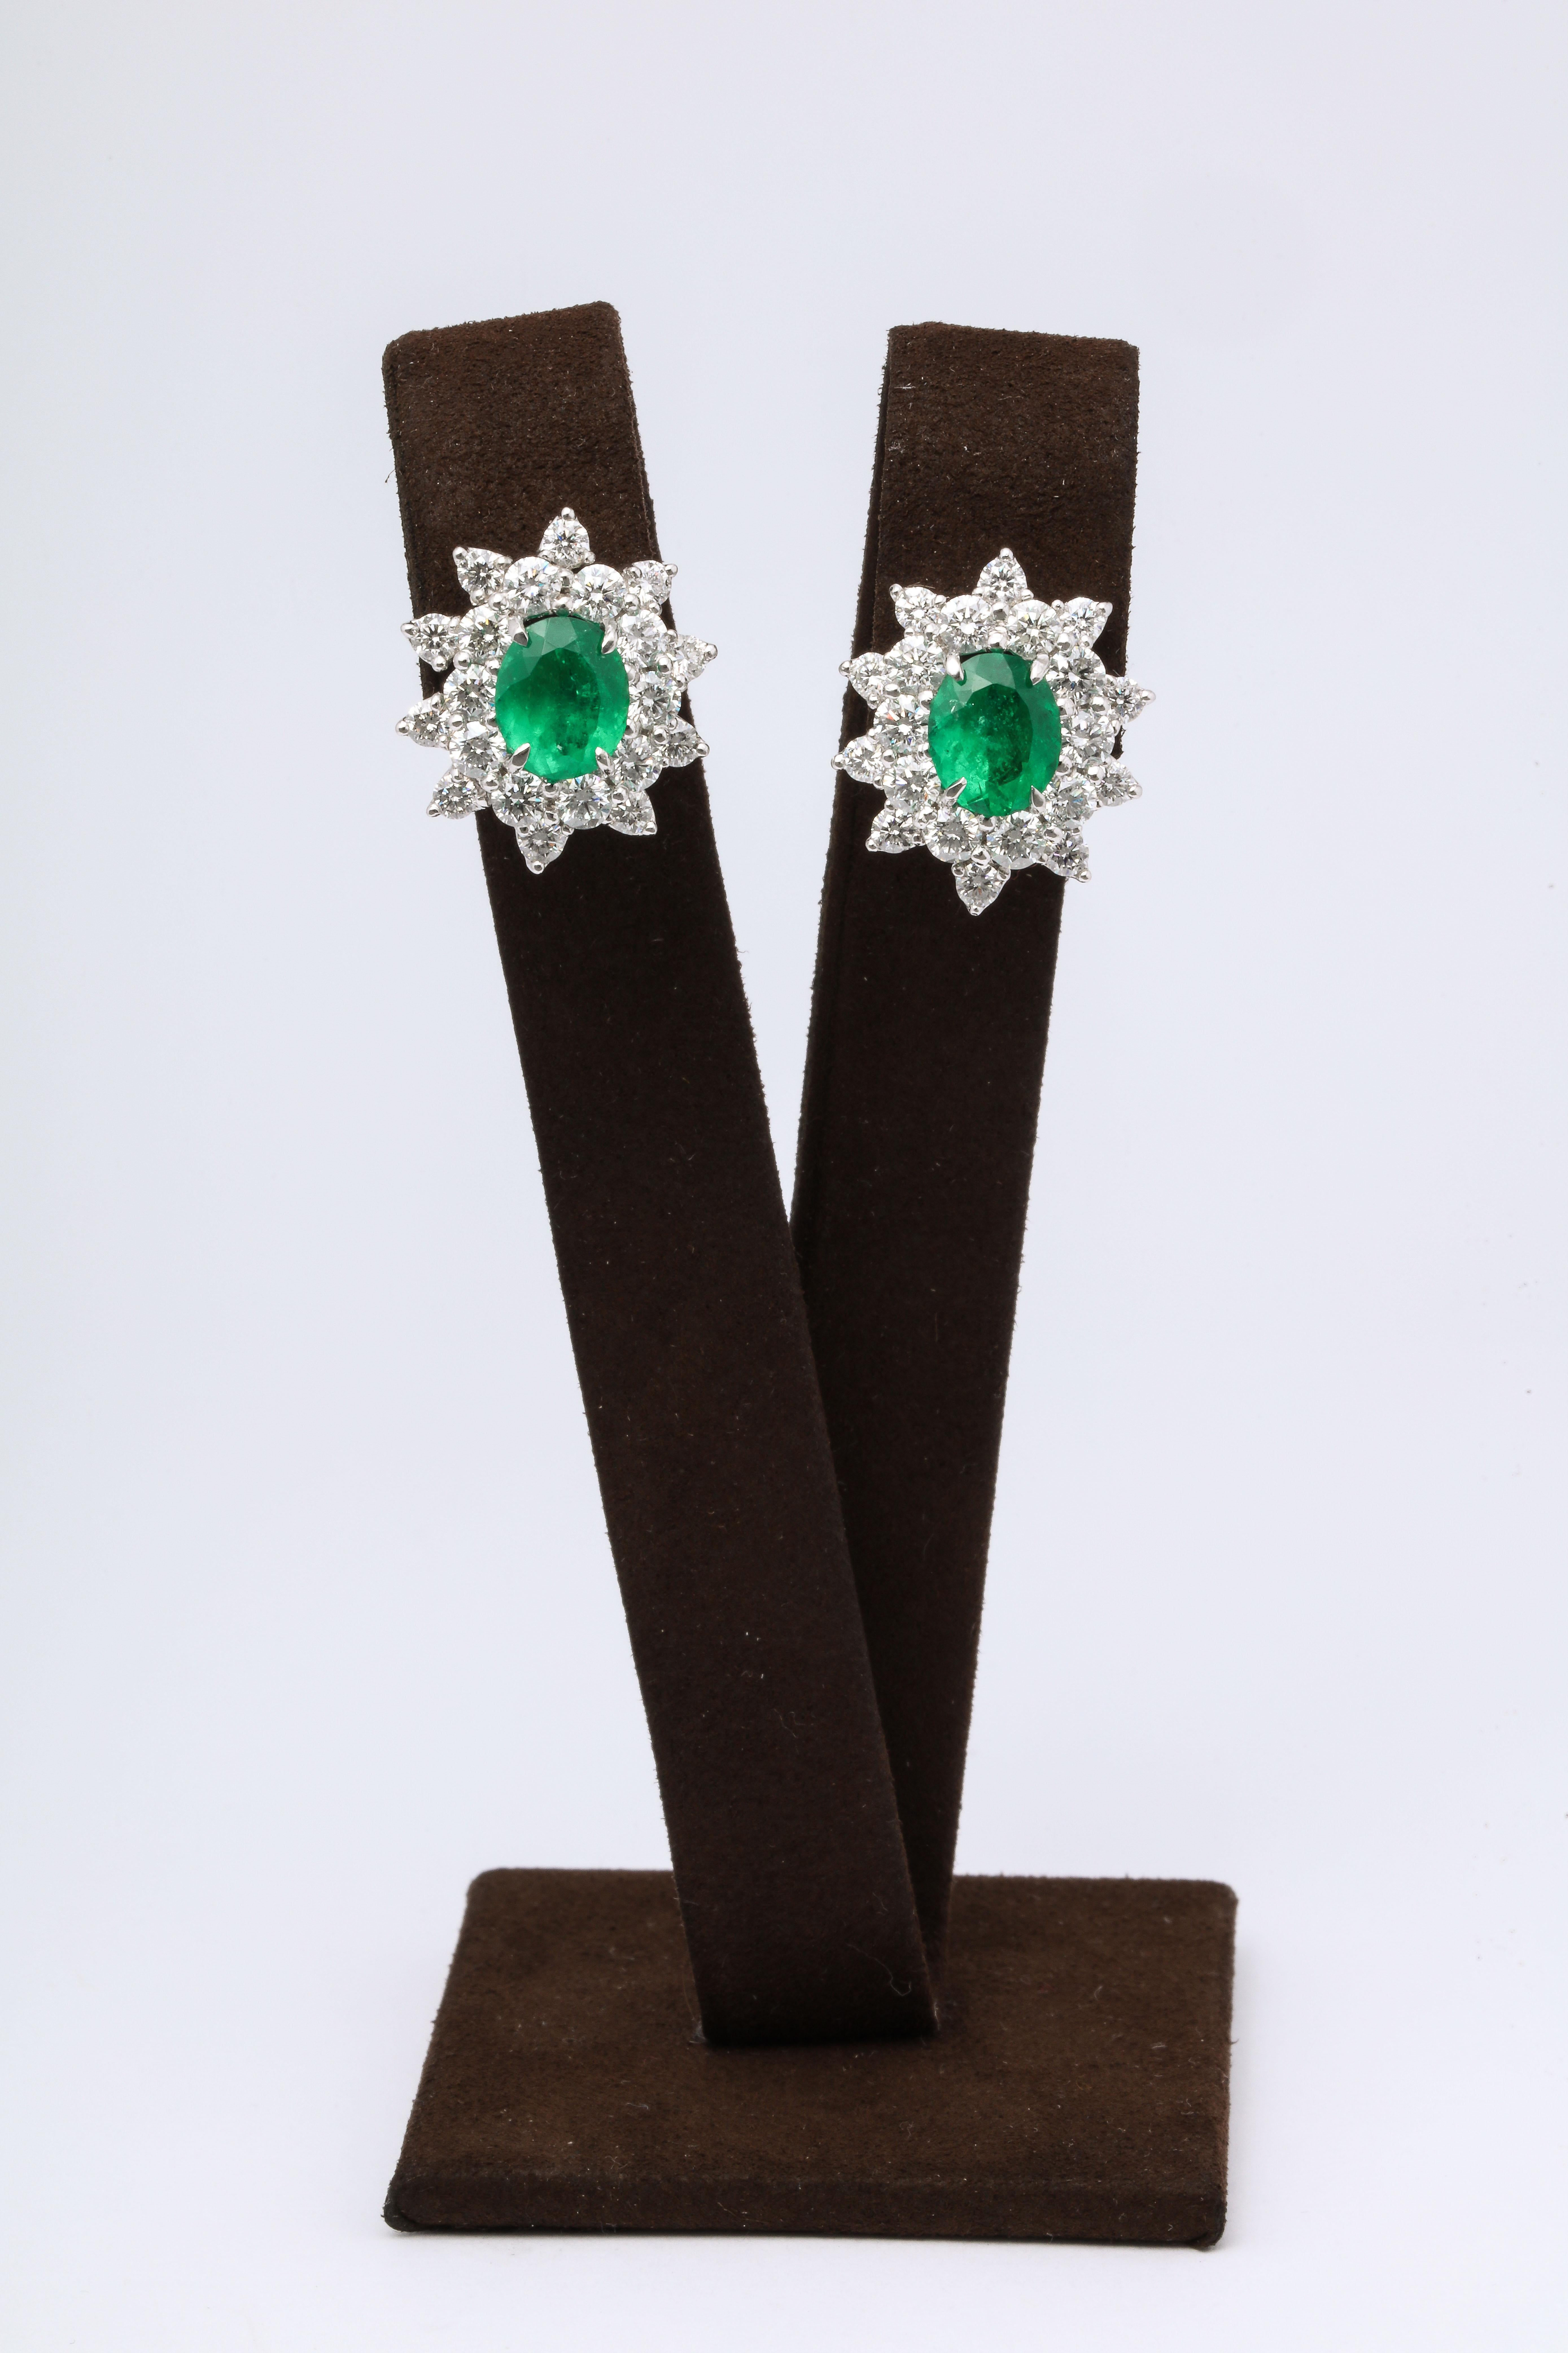 
An elegant pair of certified Colombian Emerald and Diamond Earrings

4.93 carats of 